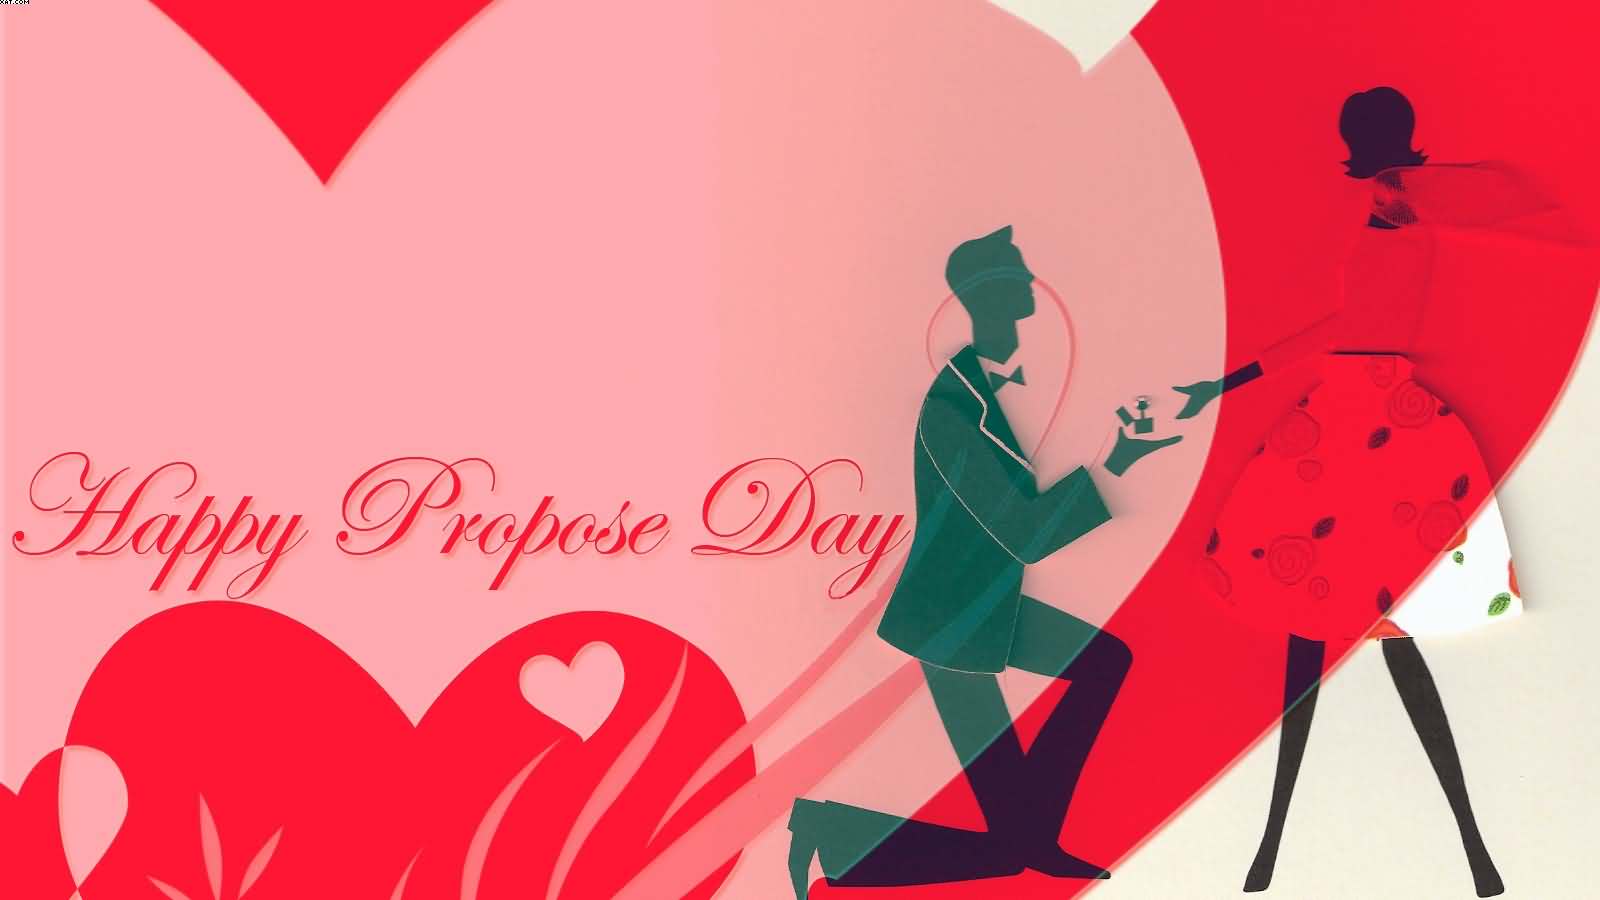 Happy Propose Day beautiful clipart wallpaper